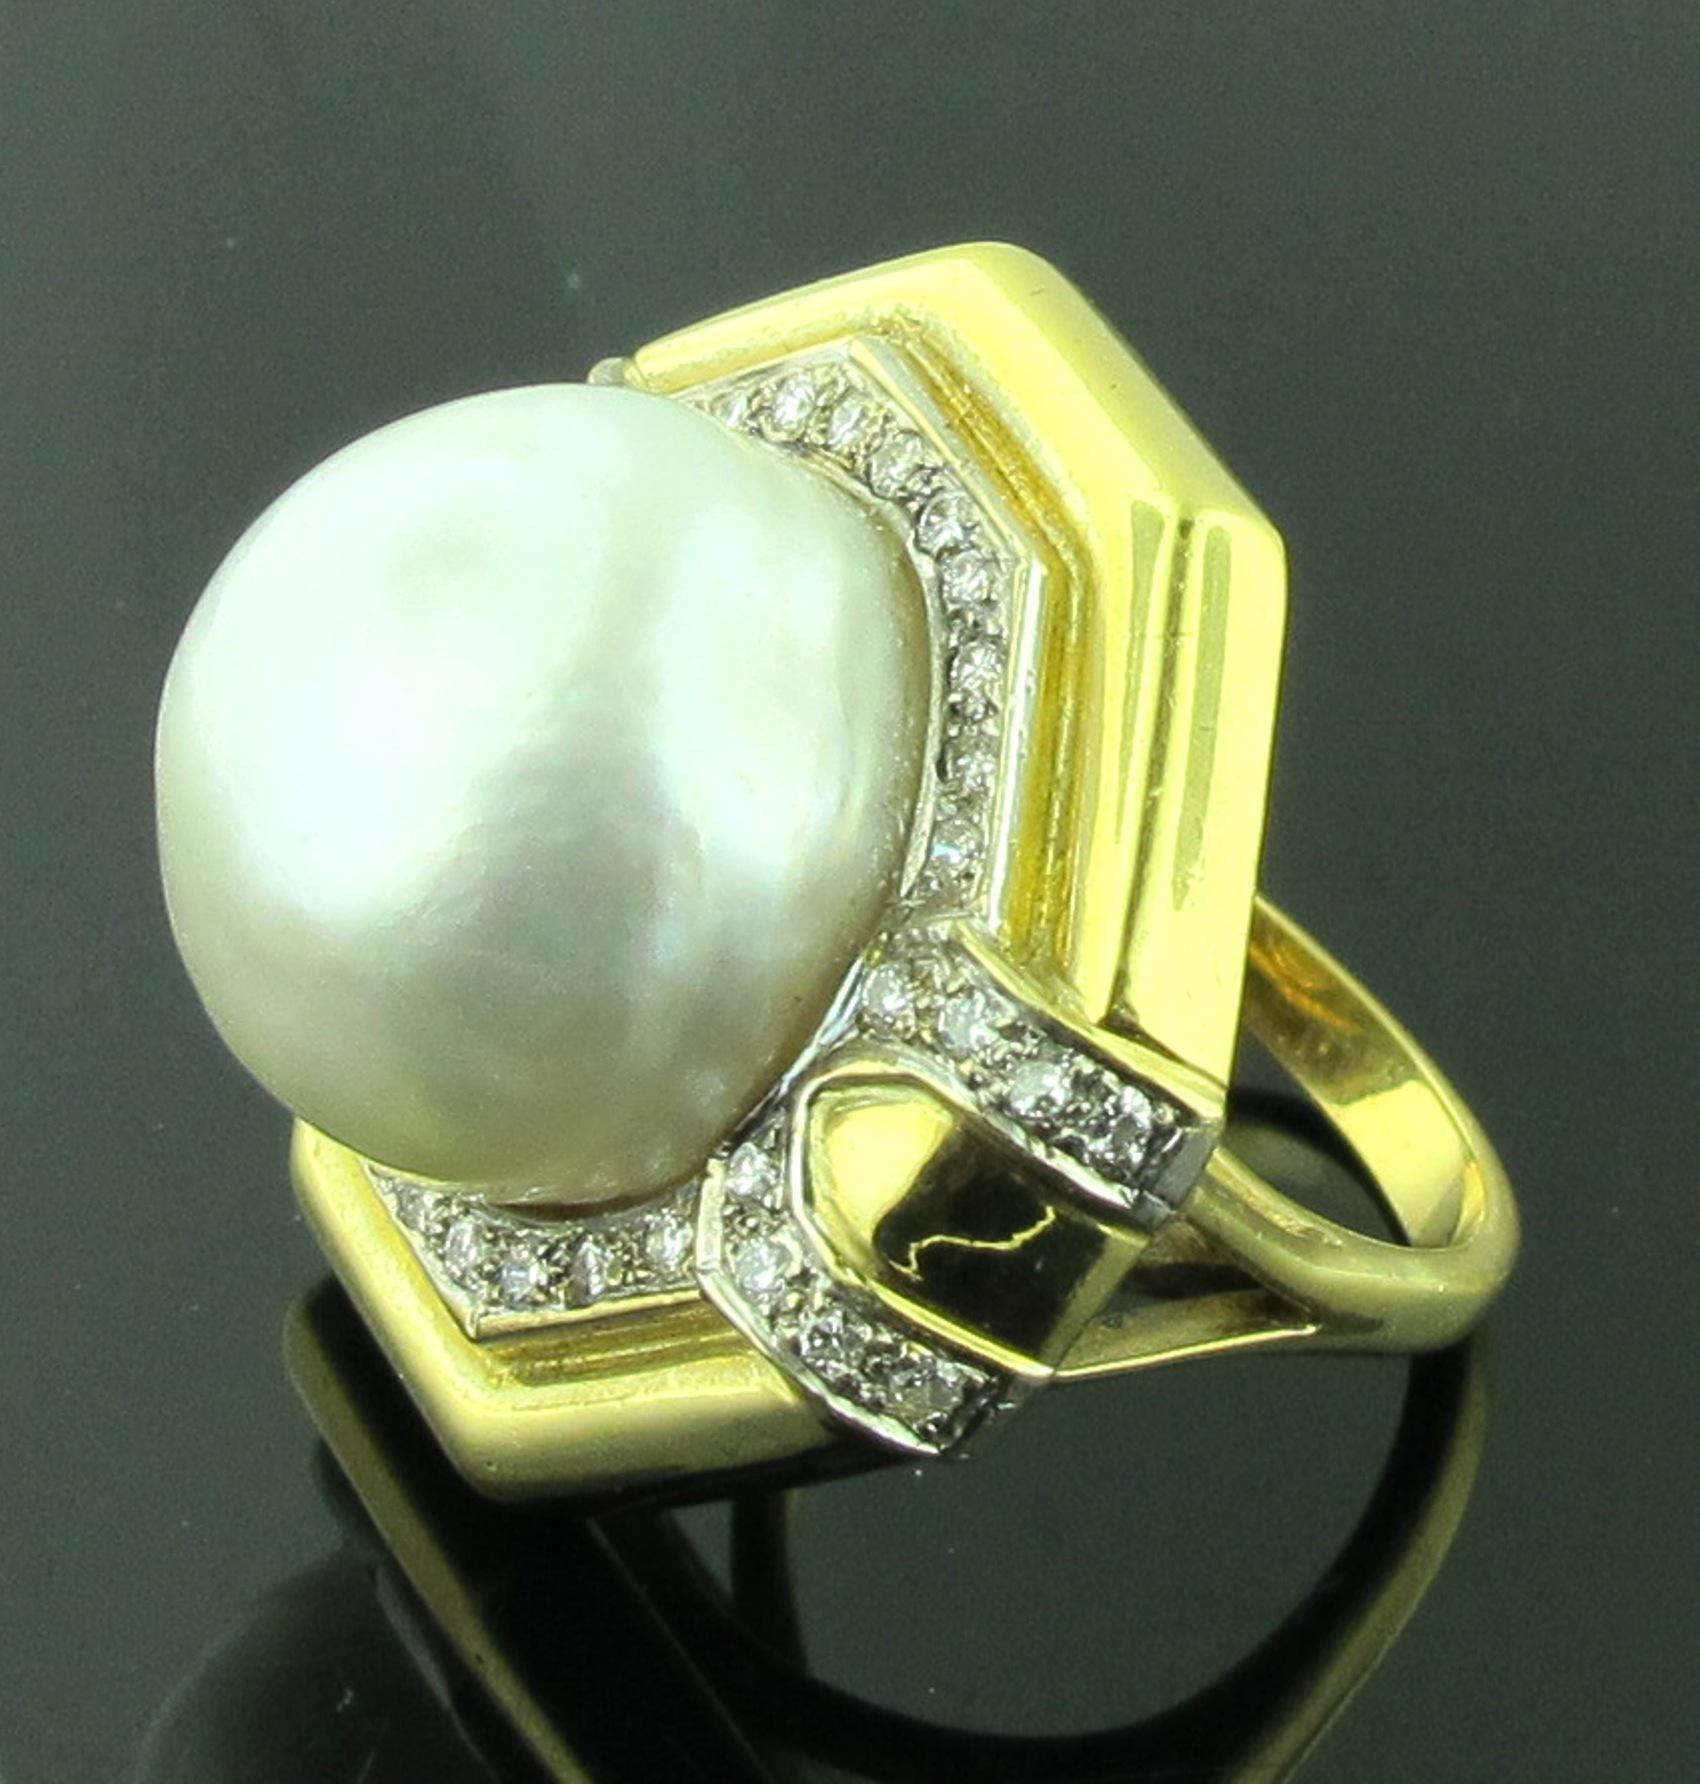 Set in 18 karat yellow gold is a 16 millimeter white South Sea Pearl surrounded by 36 round brilliant cut diamonds with a total diamond weight of 0.75 carats.  Color is I, Clarity is SI.  Ring size is 6.75.